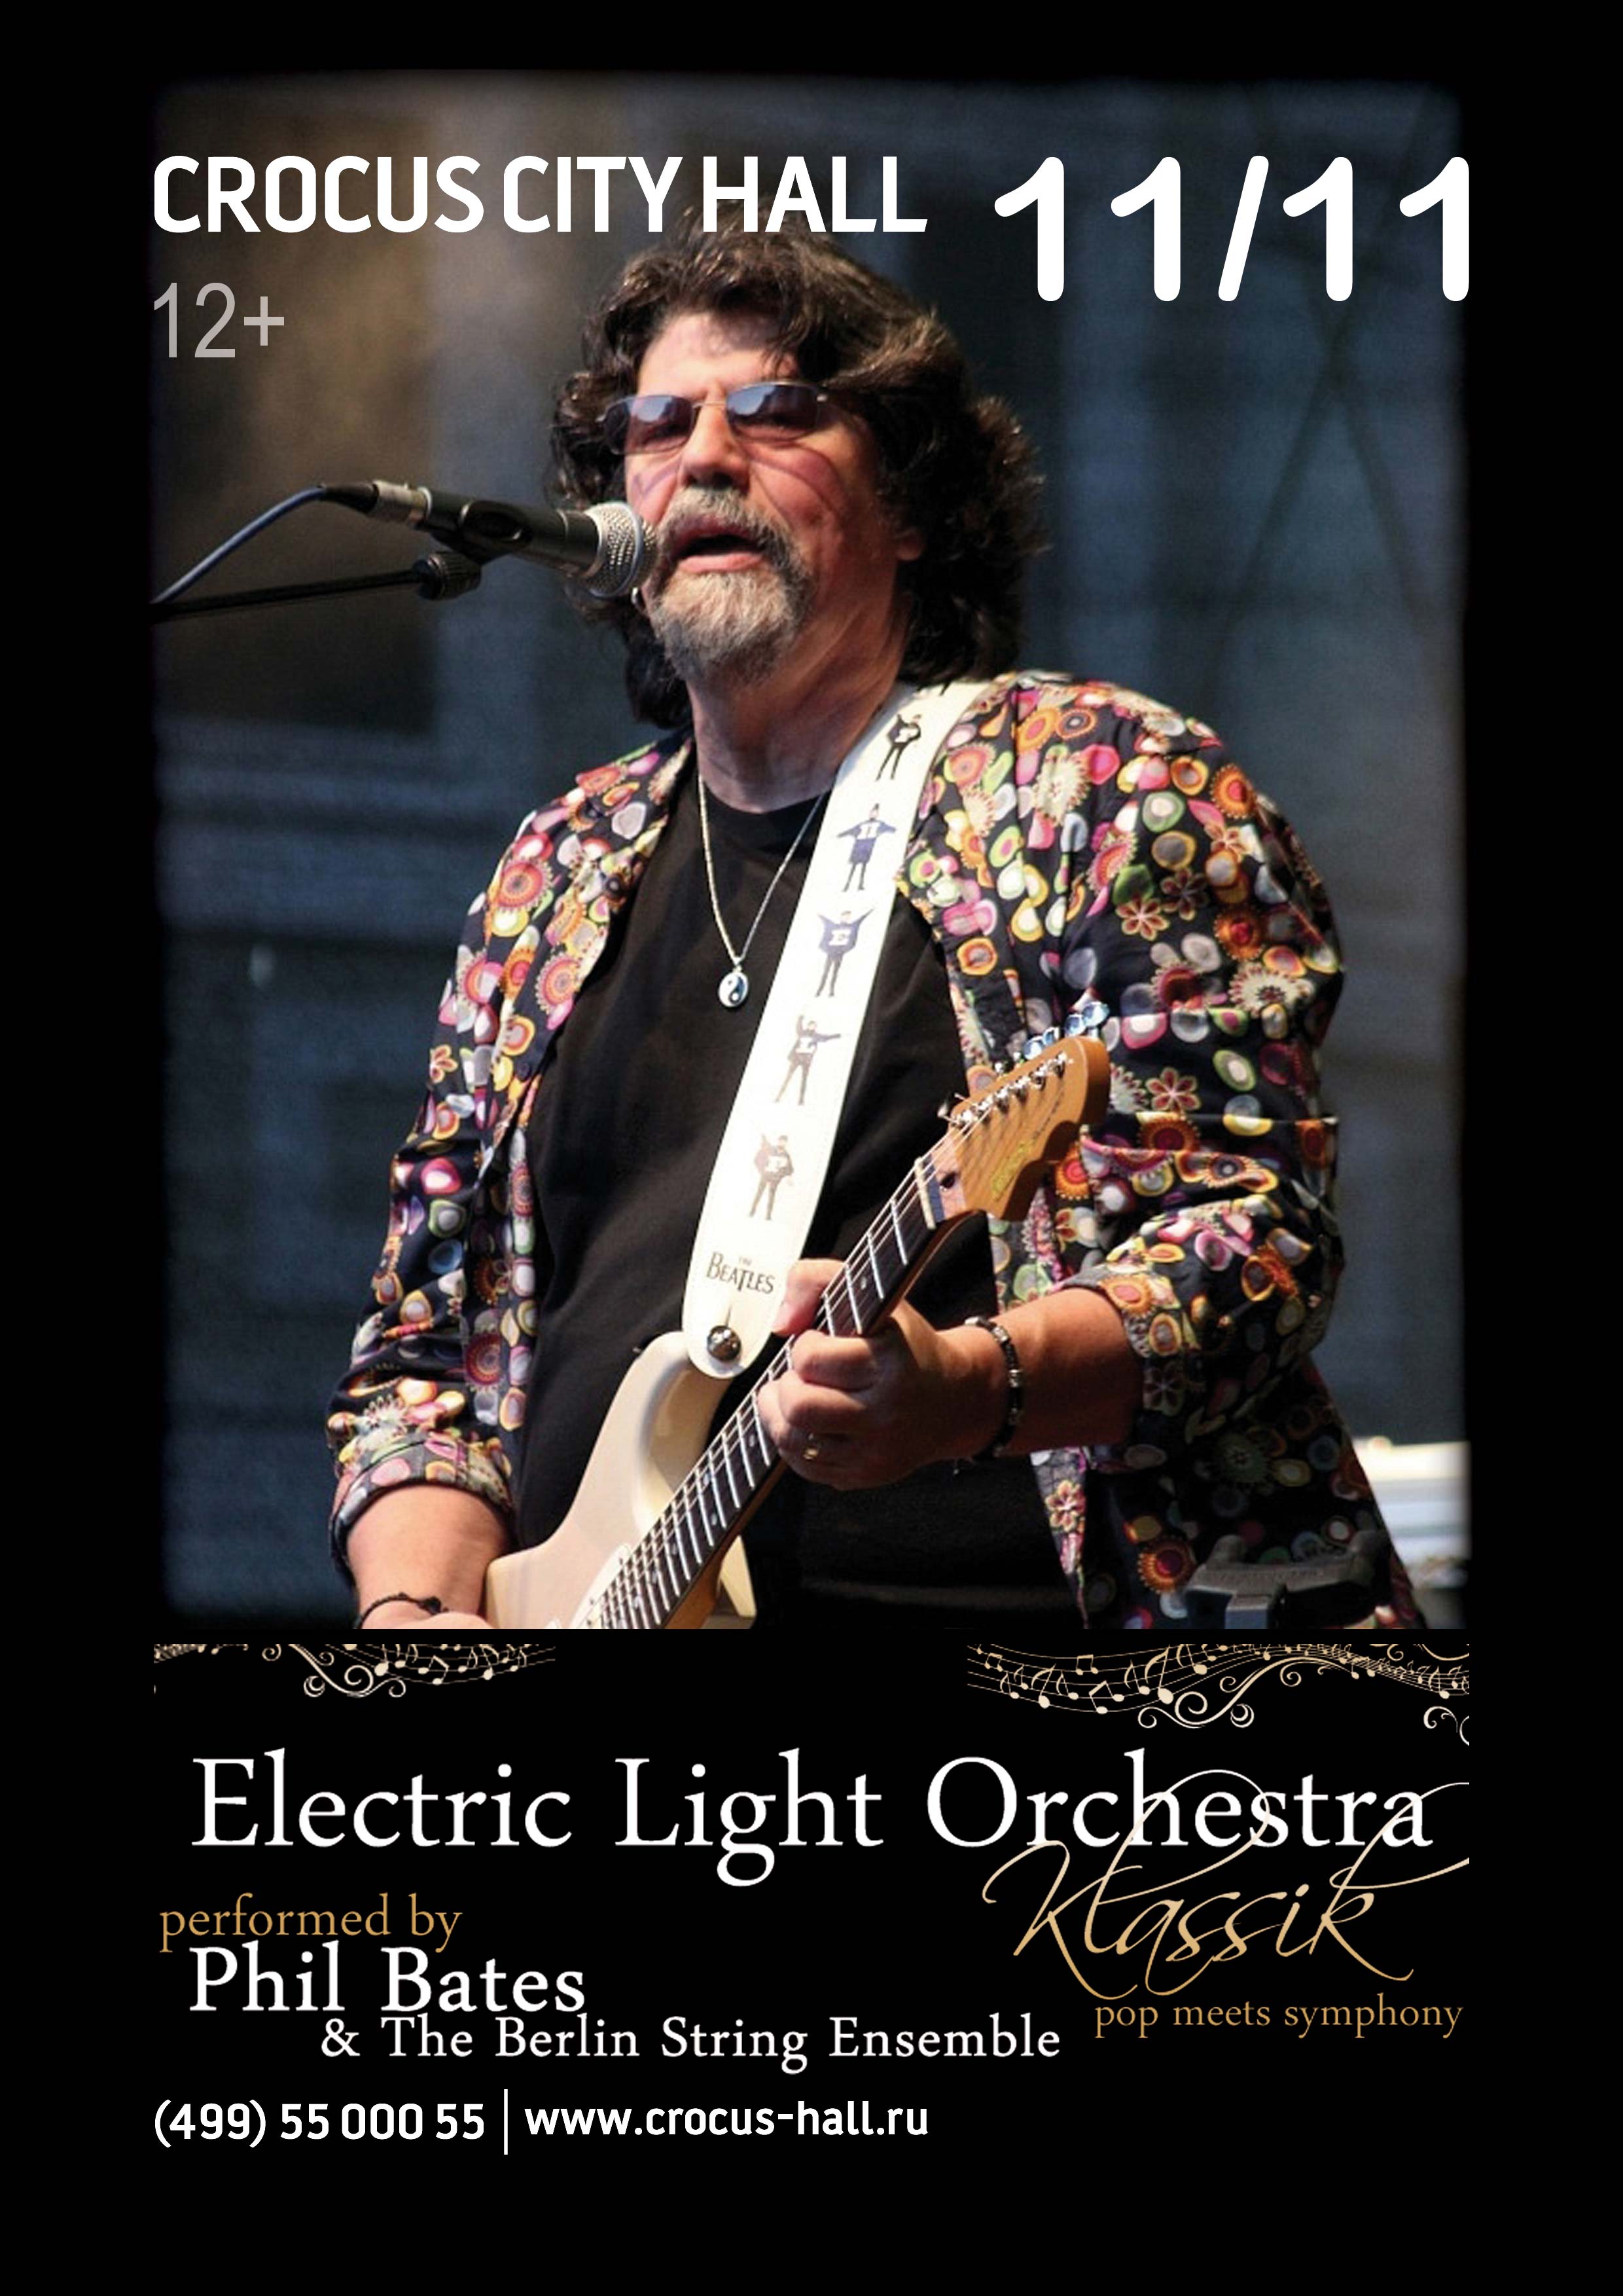 ELECTRIC LIGHT ORCHESTRA CLASSIC